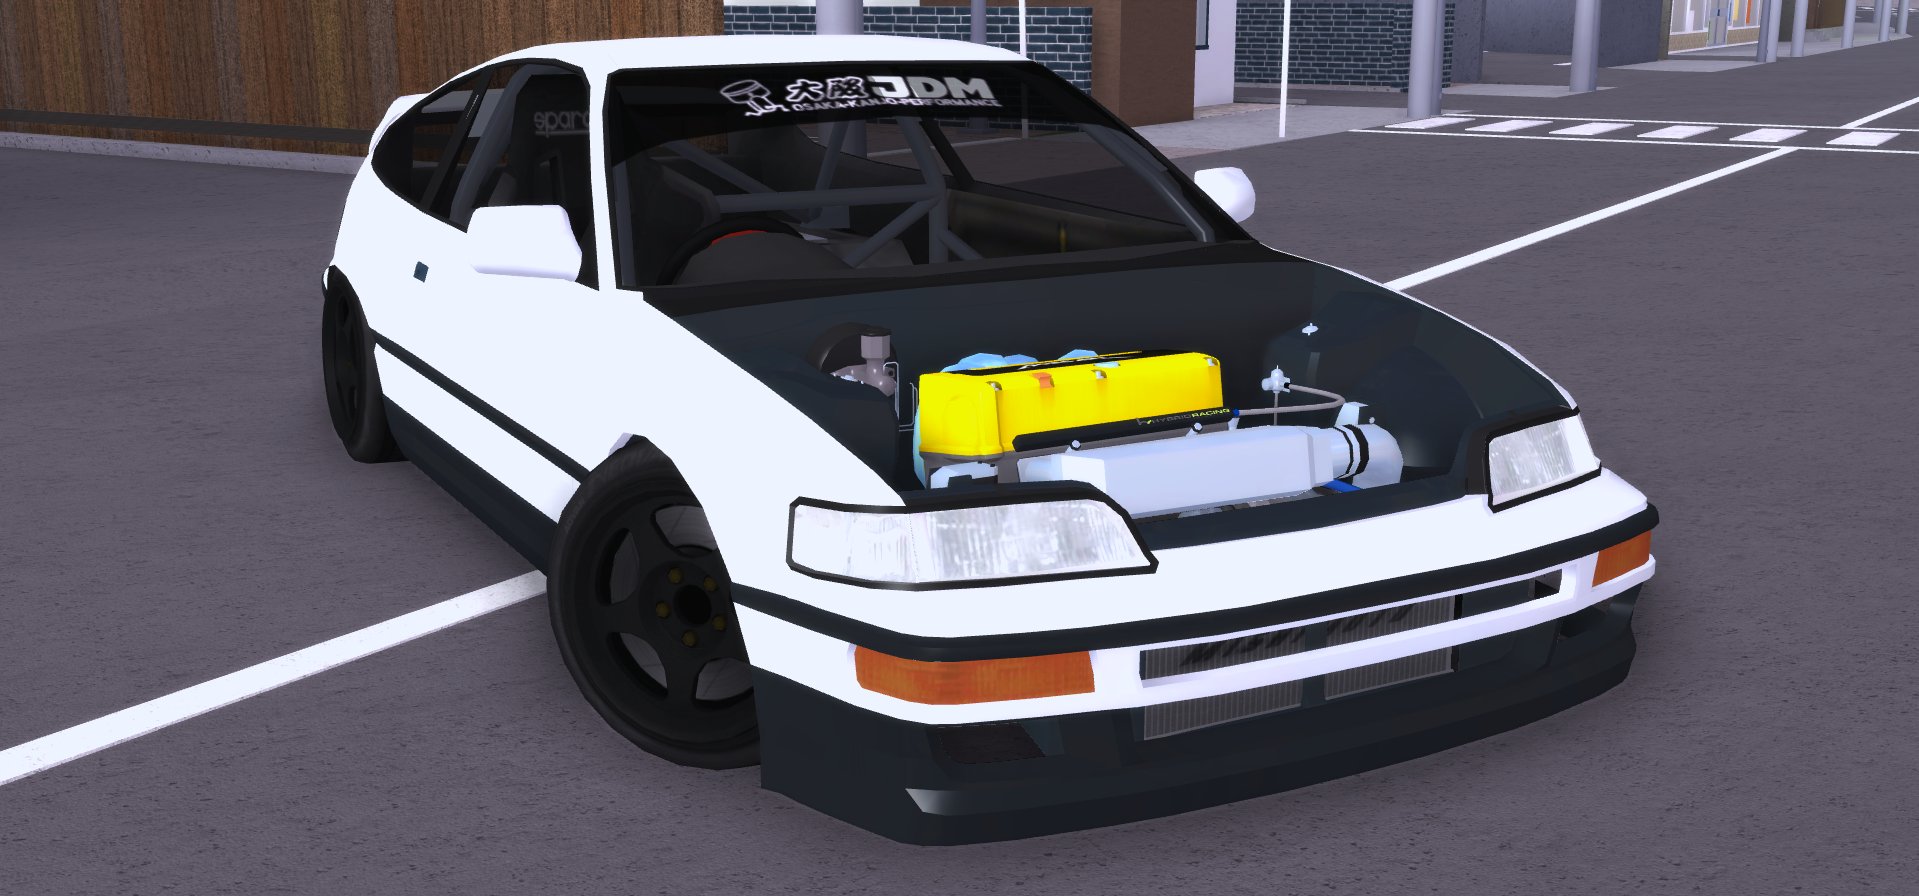 Vr38 Dylan H On Twitter Another Milestone Reached On This 93 Honda Crx Of Mine Robloxdev Roblox Honda 3dmodeling Blender - dev team honda nsx roblox